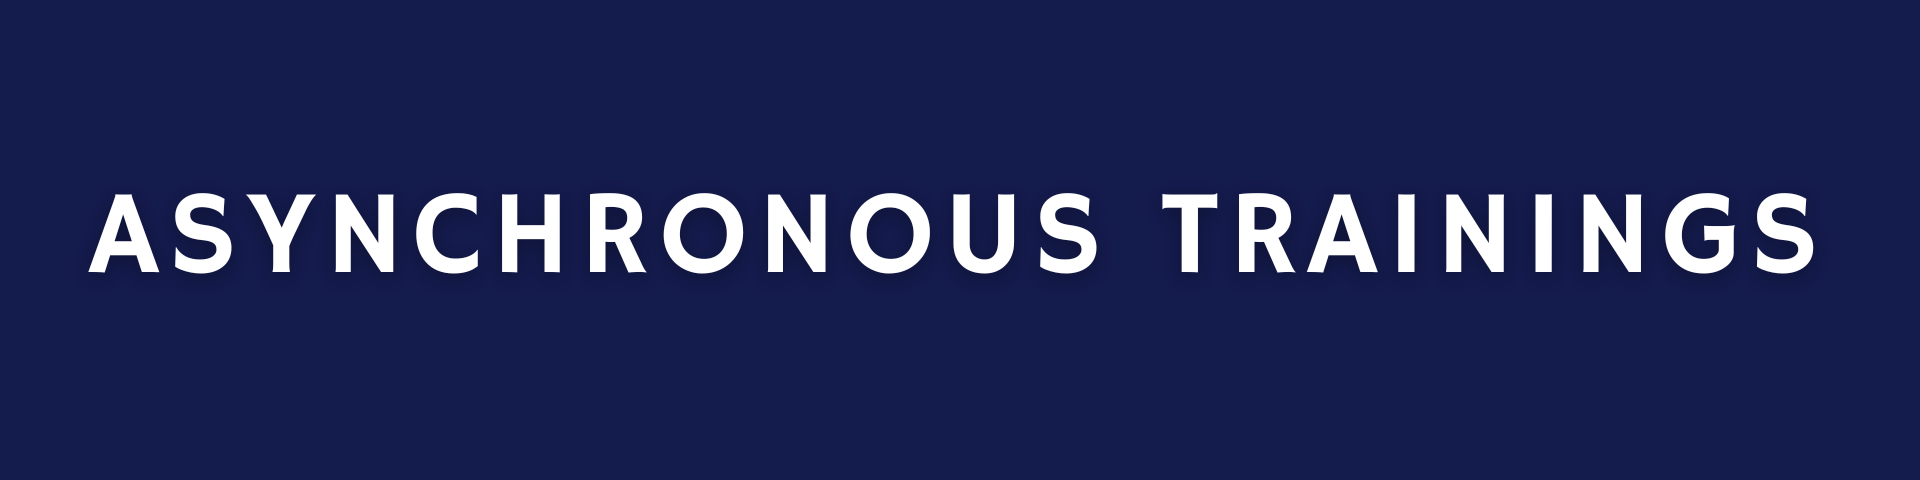 Header with the words "Asynchronous Trainings" in white letters on blue background